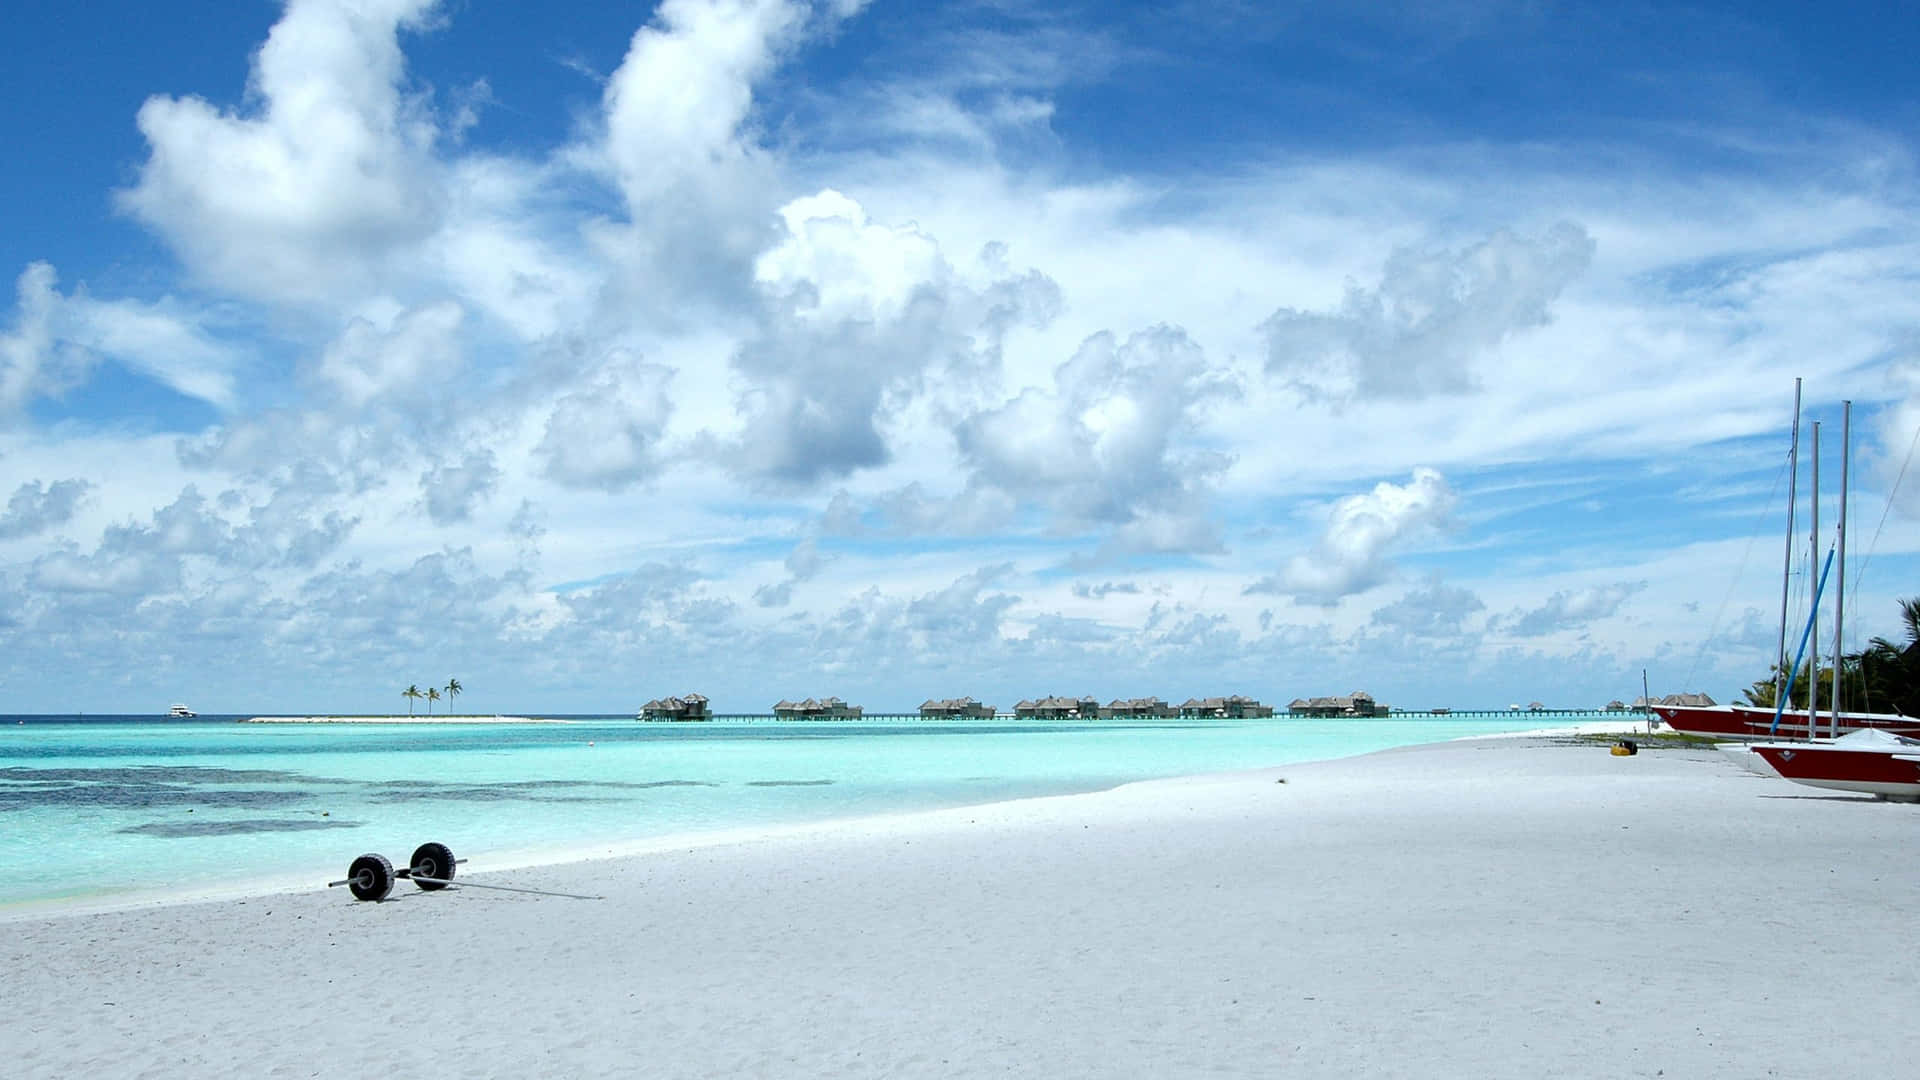 Spend your day relaxing at this beautiful, serene beach.